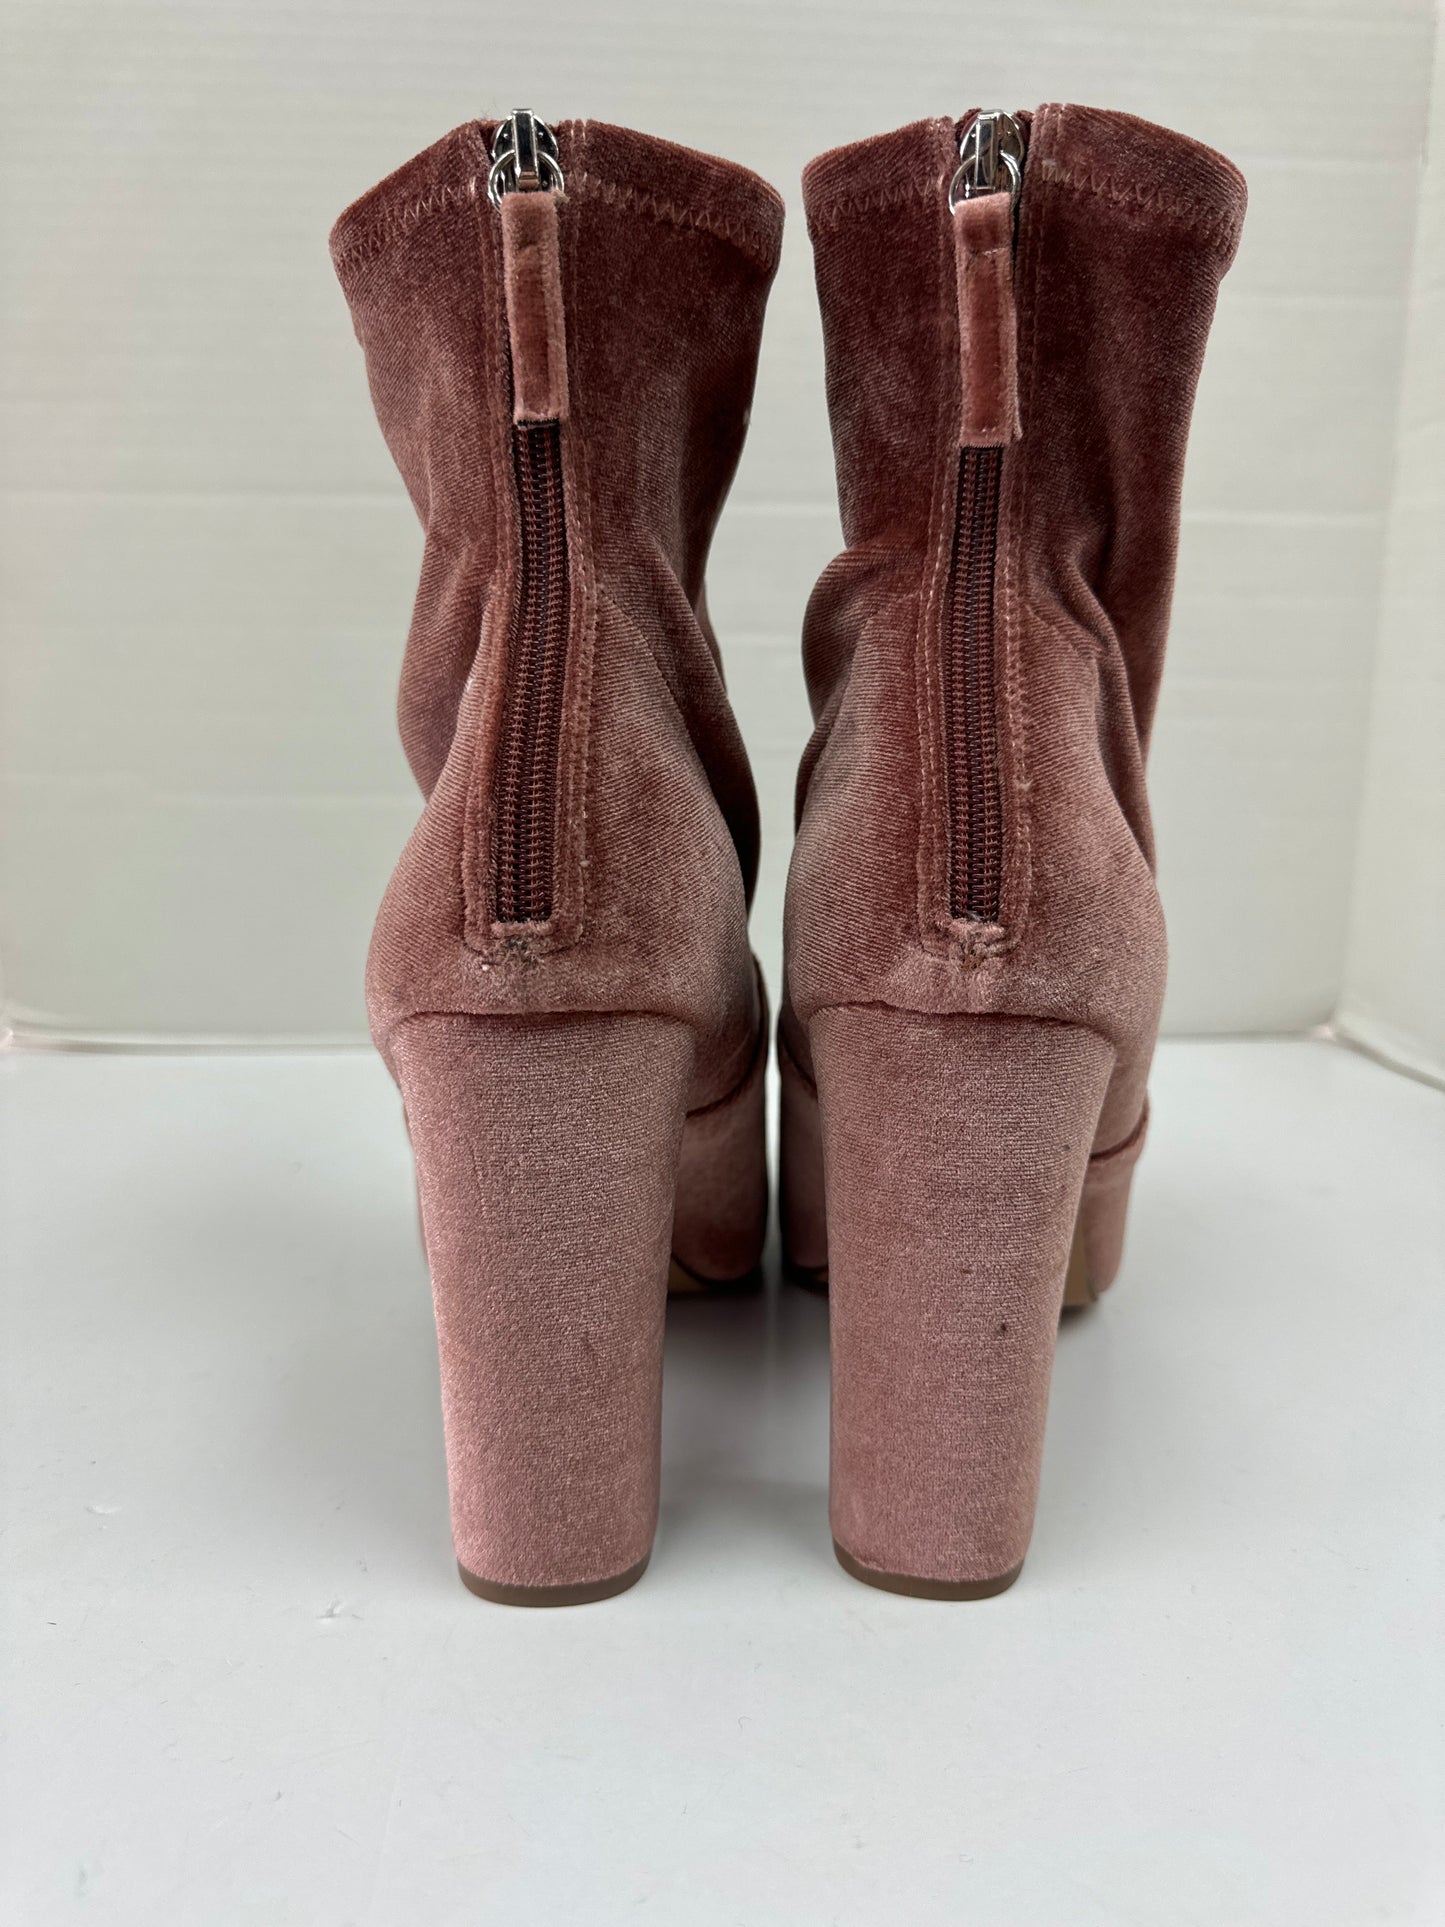 Pink Boots Ankle Heels Steve Madden, Size 10